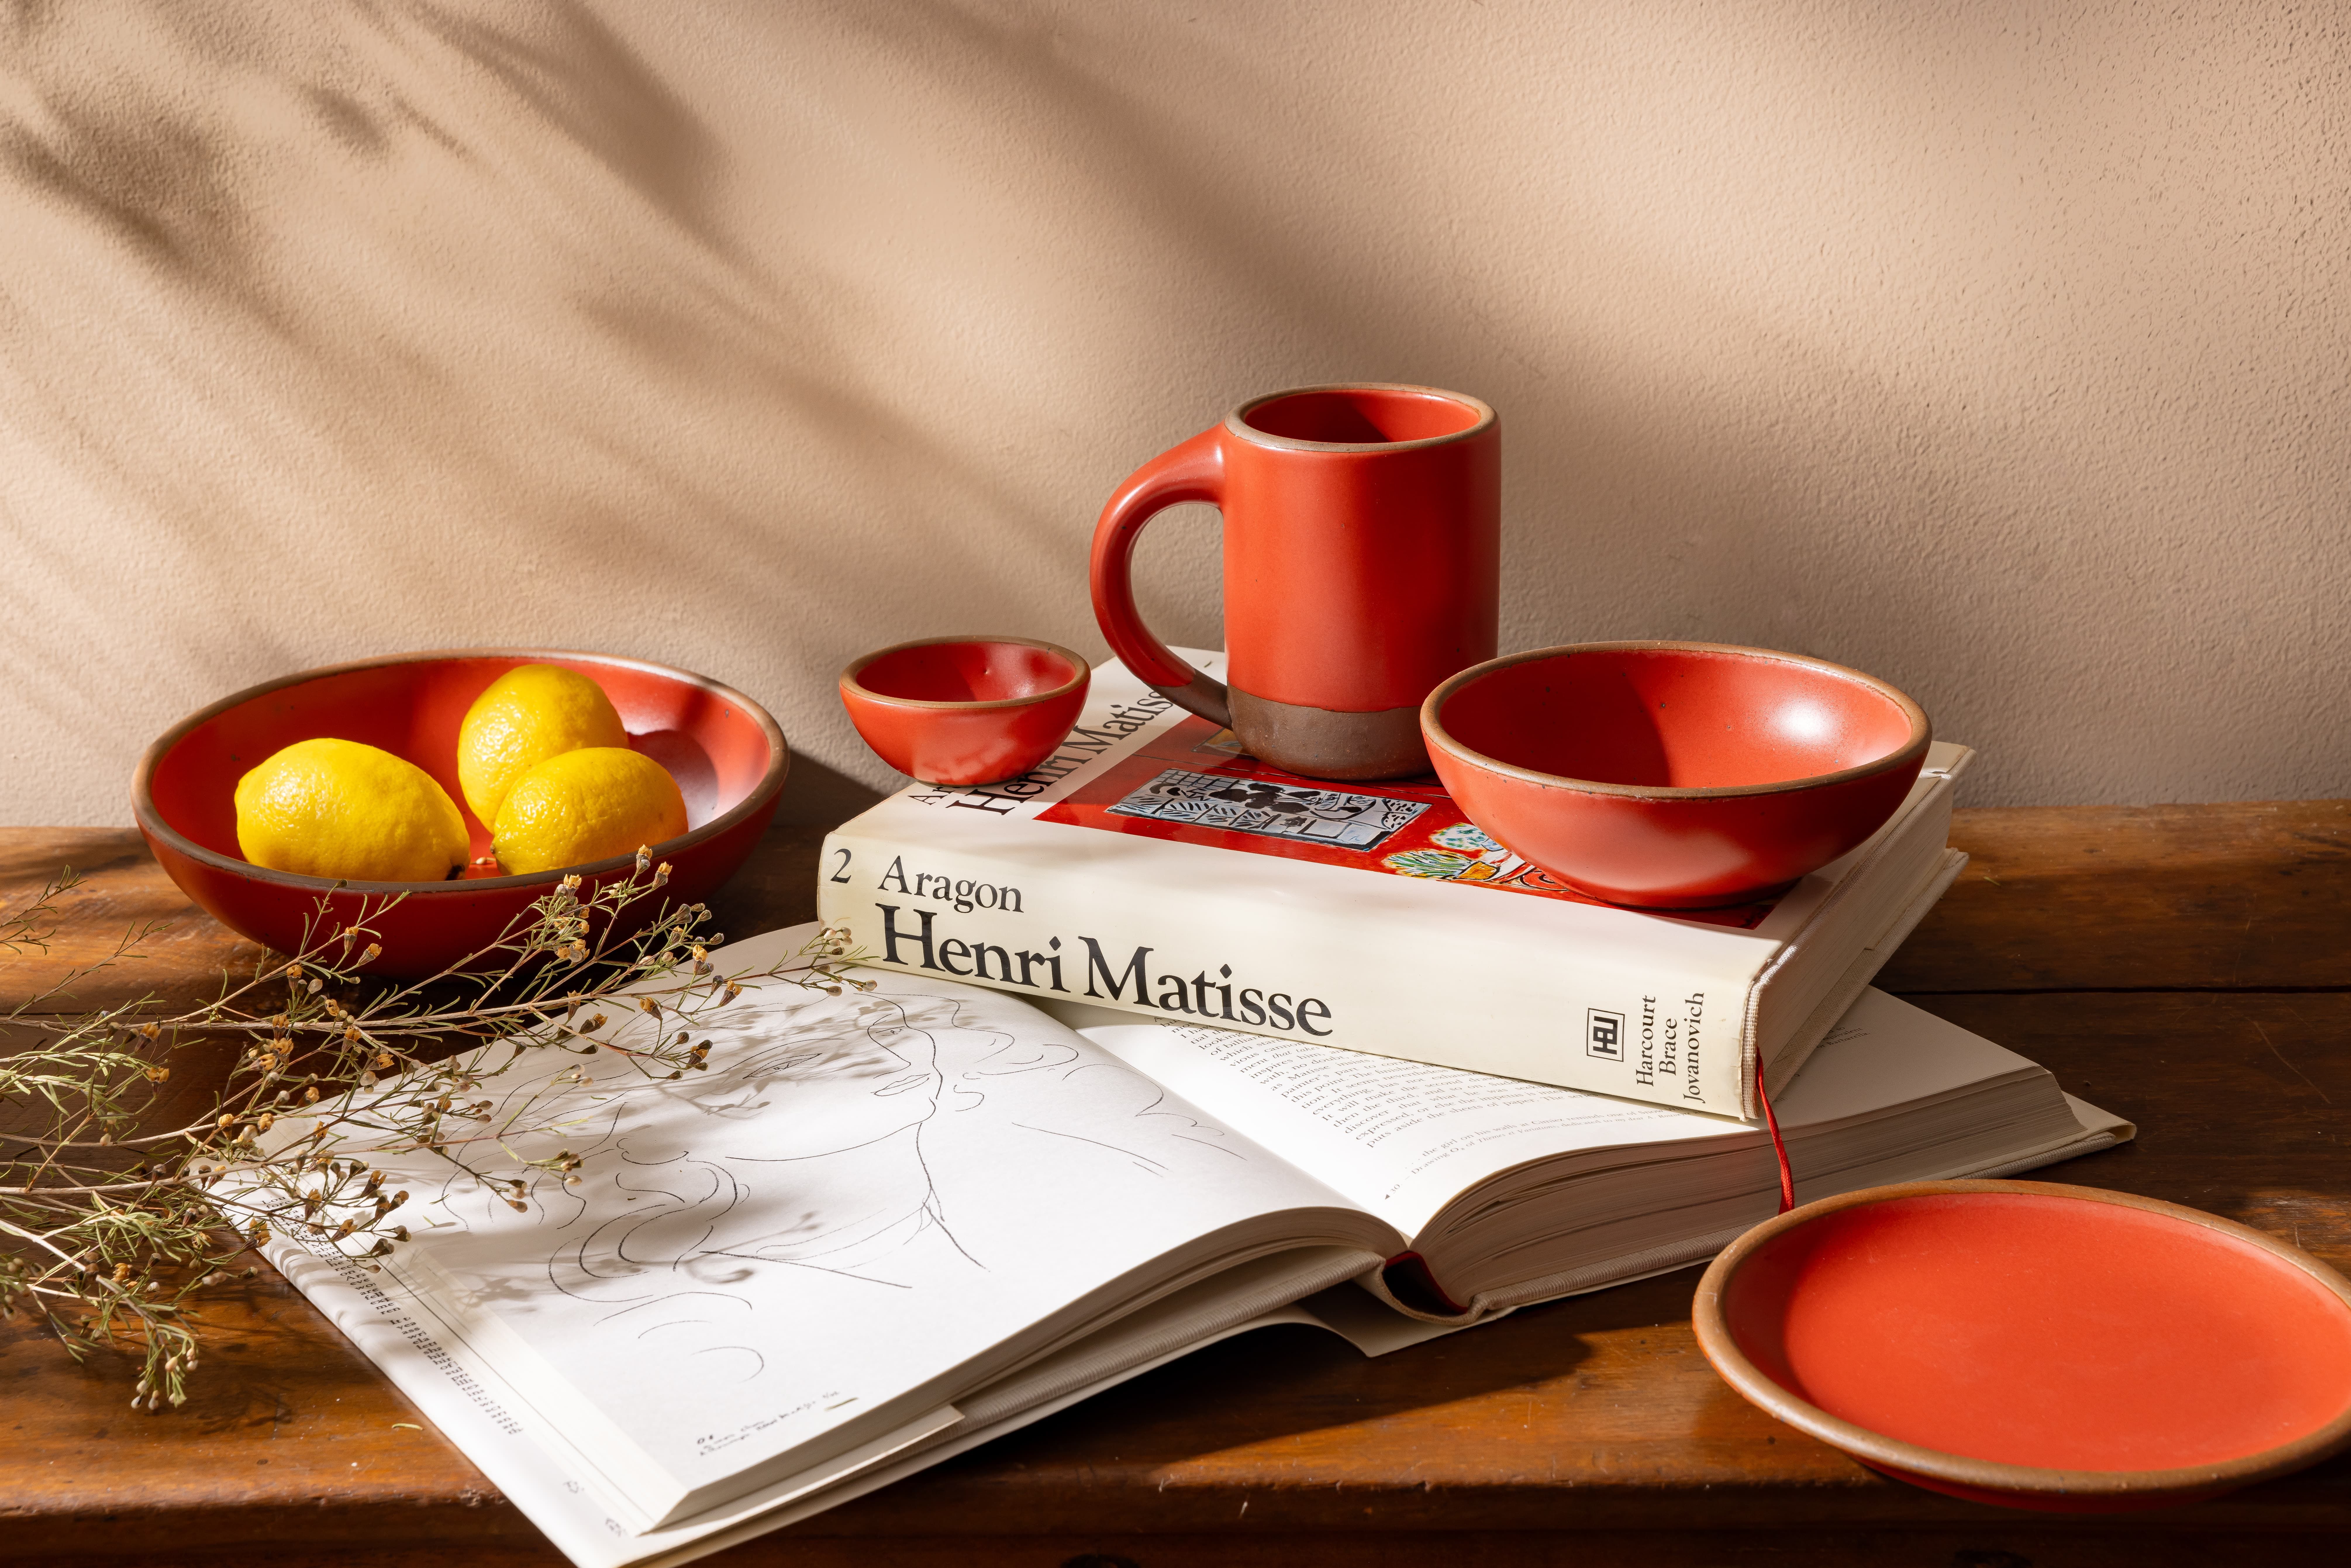 A table setting featuring open books of Henri's Matisse's work, ceramic mug, bowls, and plates in a bold red color. Shadows are cast from a nearby window and lemons are inside the bowl on the left.